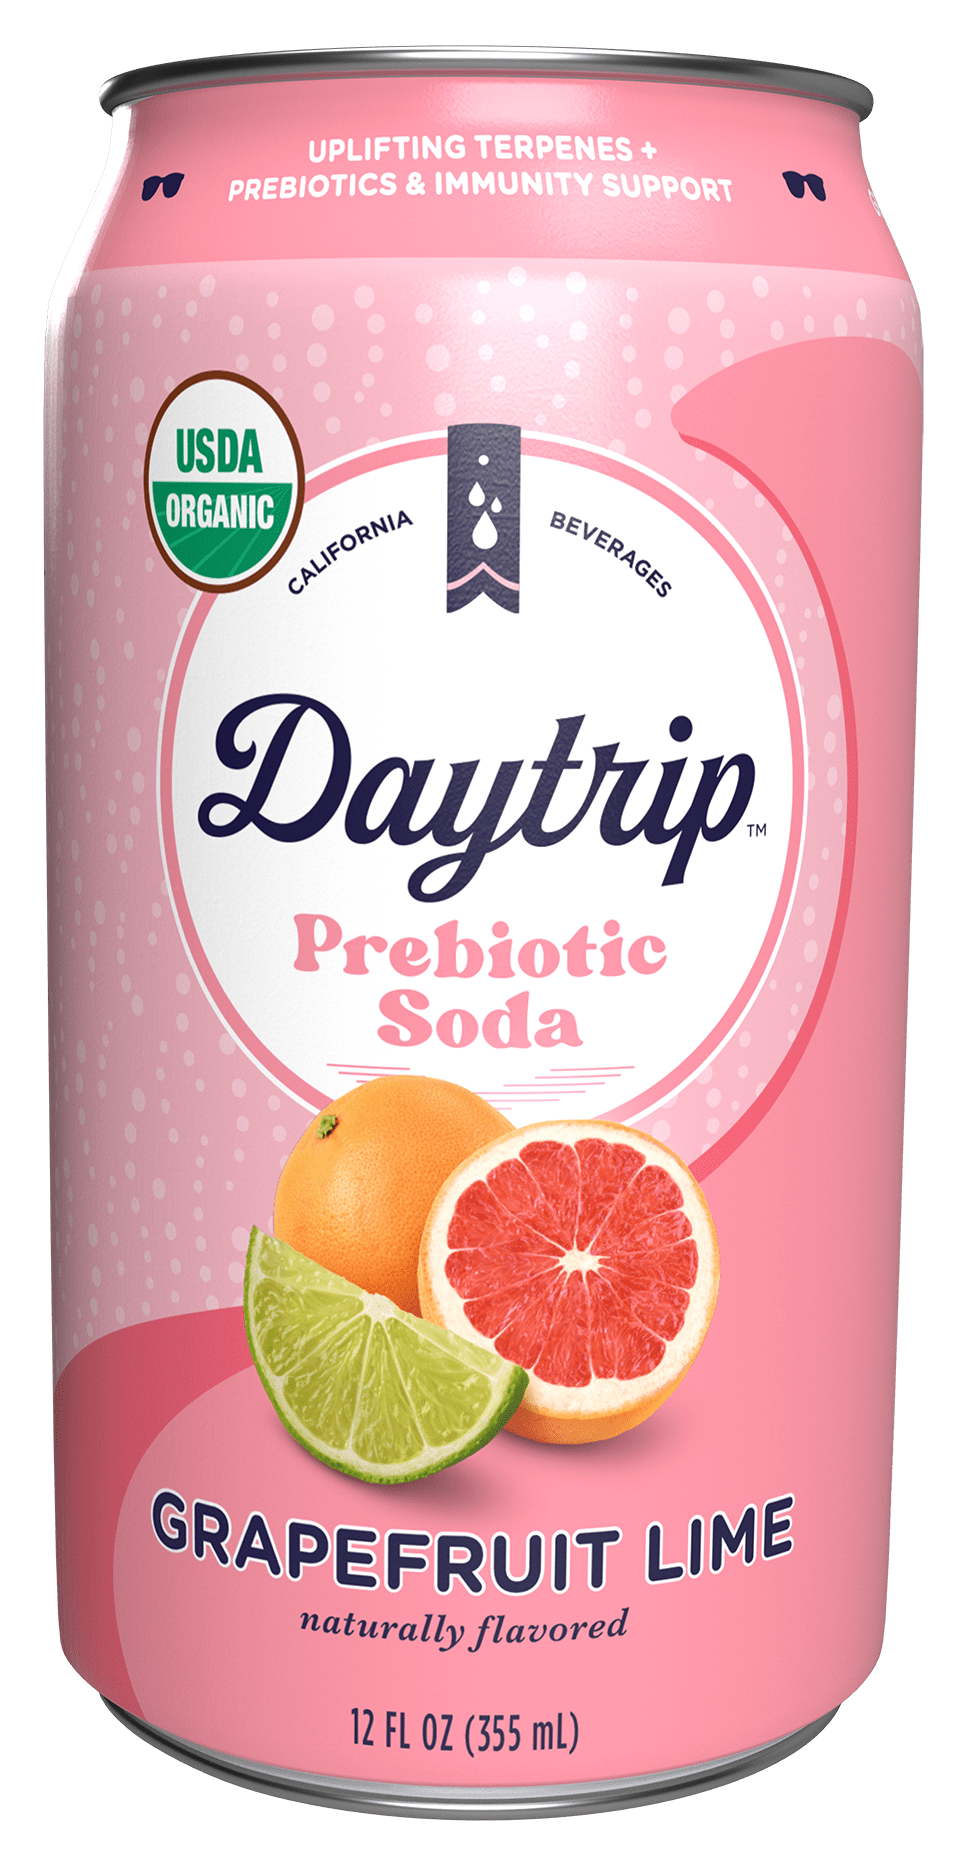 Front can render of Daytrip grapefruit lime prebiotic soda